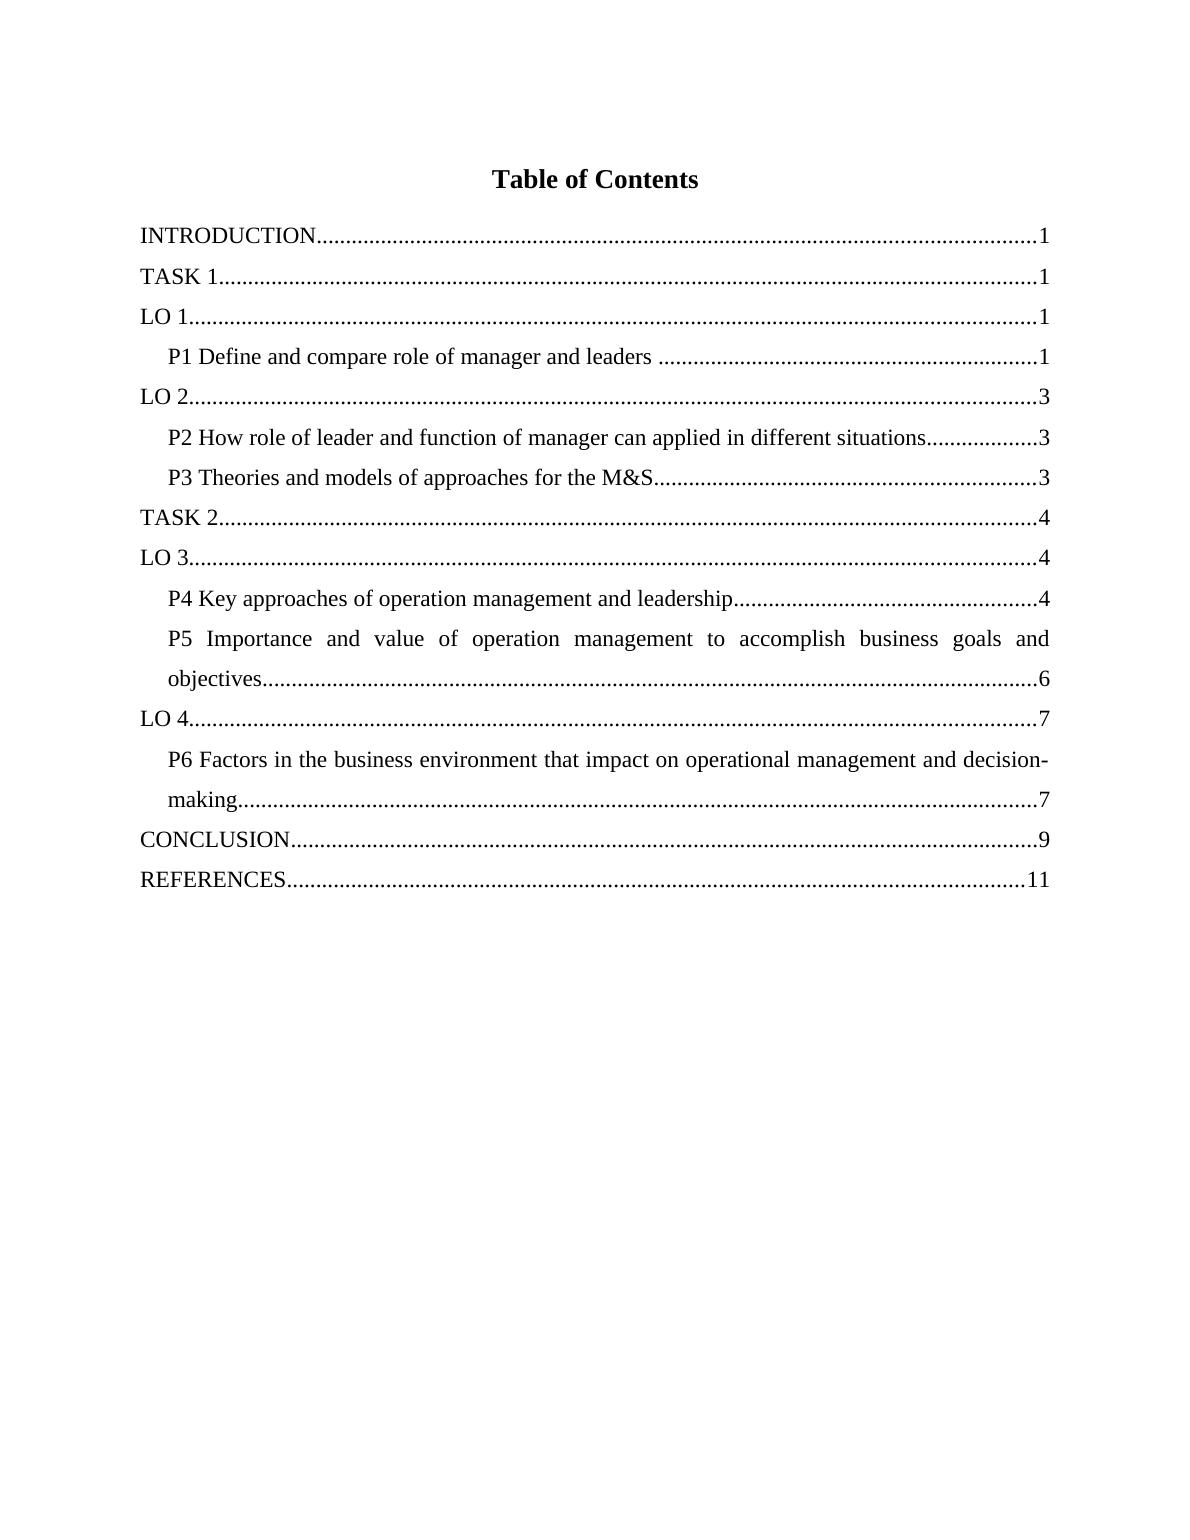 Management and Operations Assignment  Essay_2